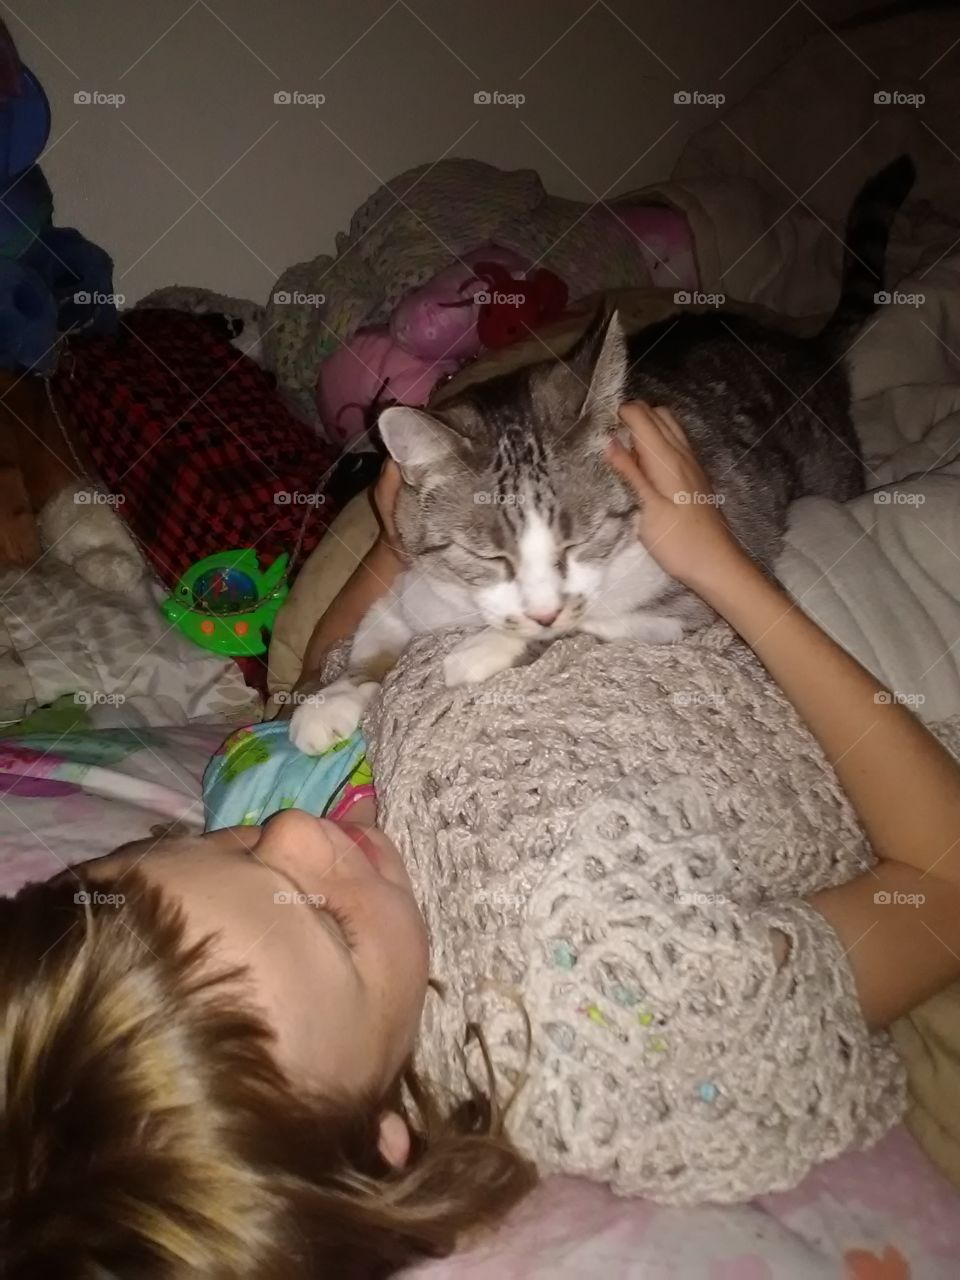 kitty cat needed her goodnight lovings. she likes to come up and give us a hug and want to be put before we go to sleep.